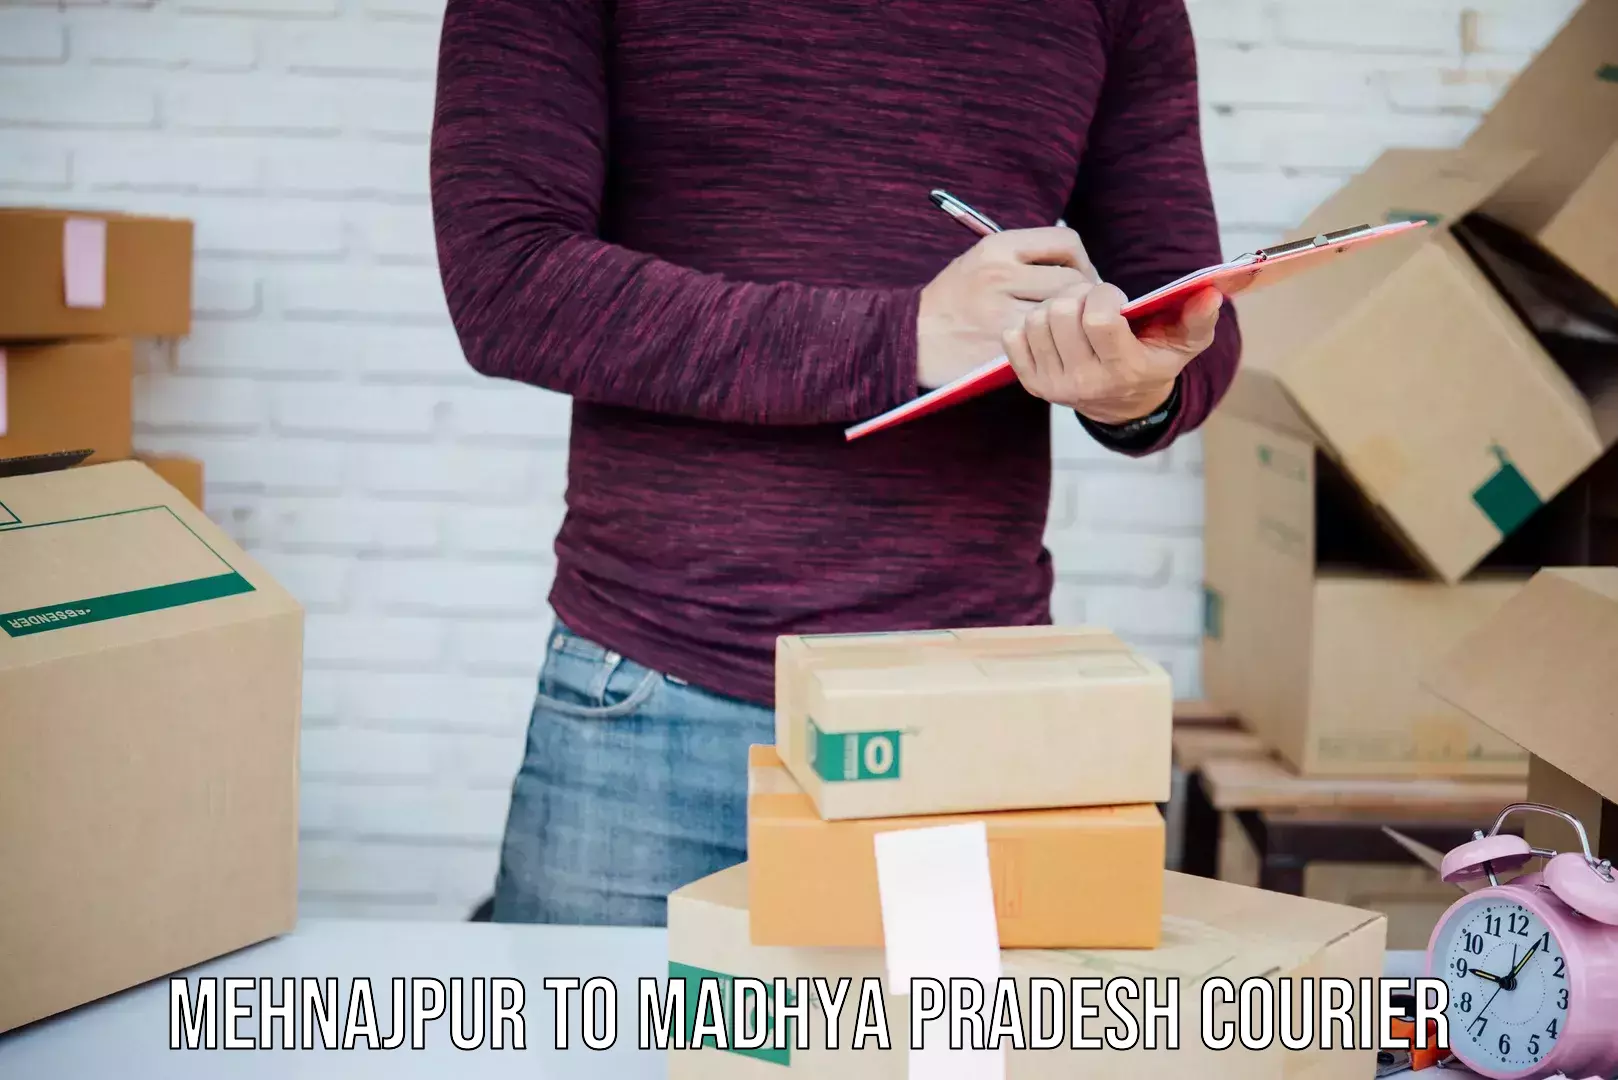 Subscription-based courier Mehnajpur to Sausar